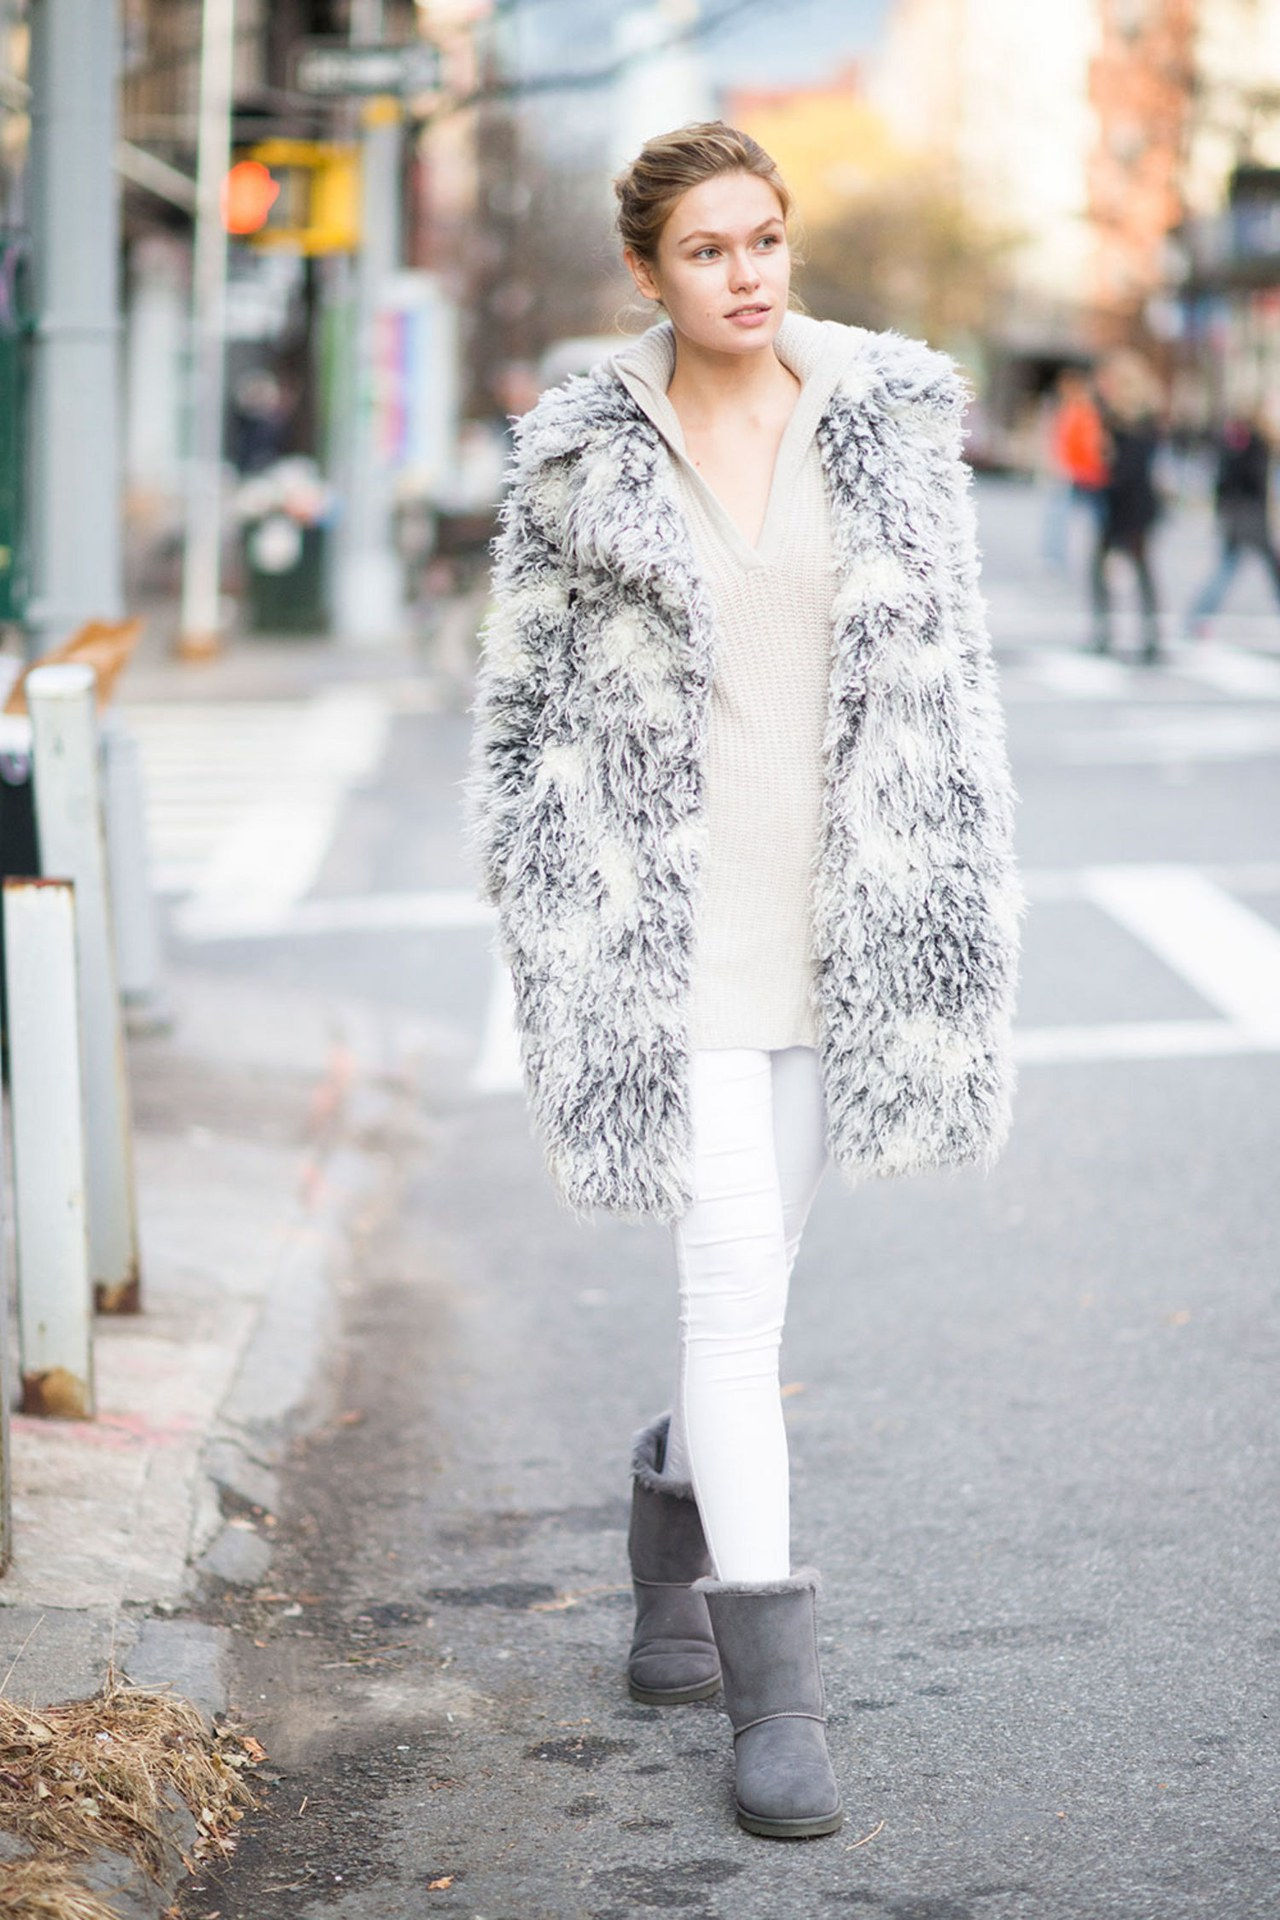 niedlich ugg street style outfit white jeans gray uggs winter